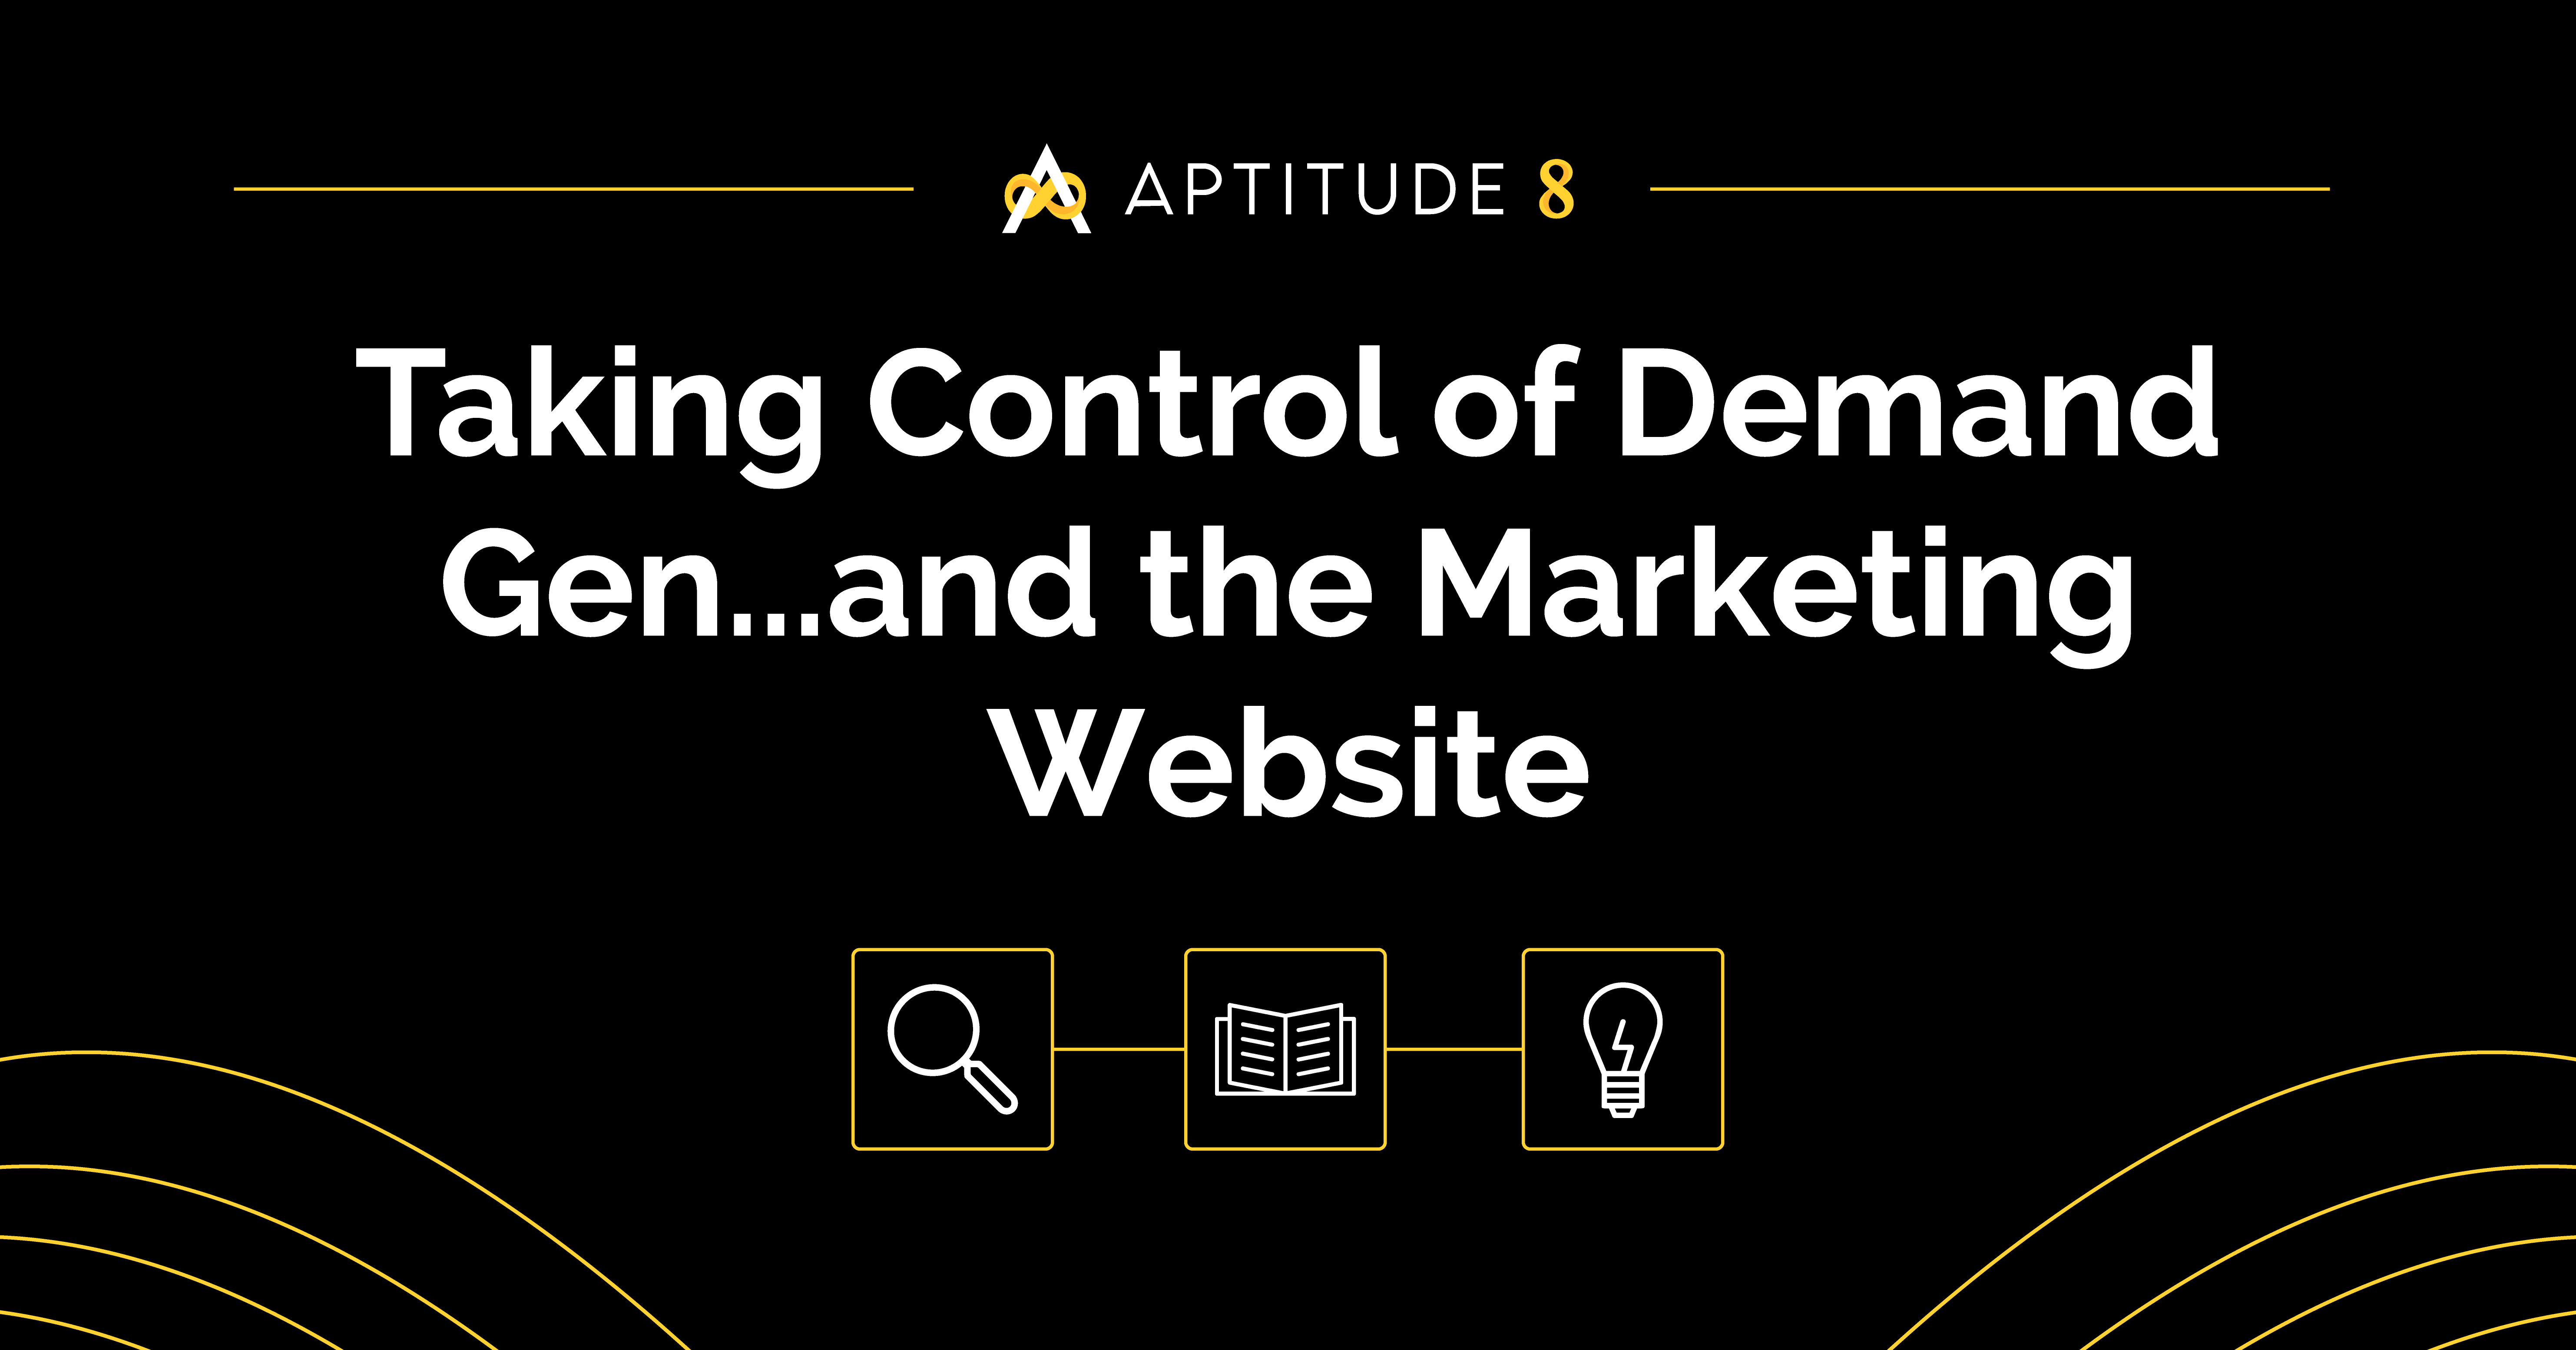 Taking Control of Demand Gen...and the Marketing Website